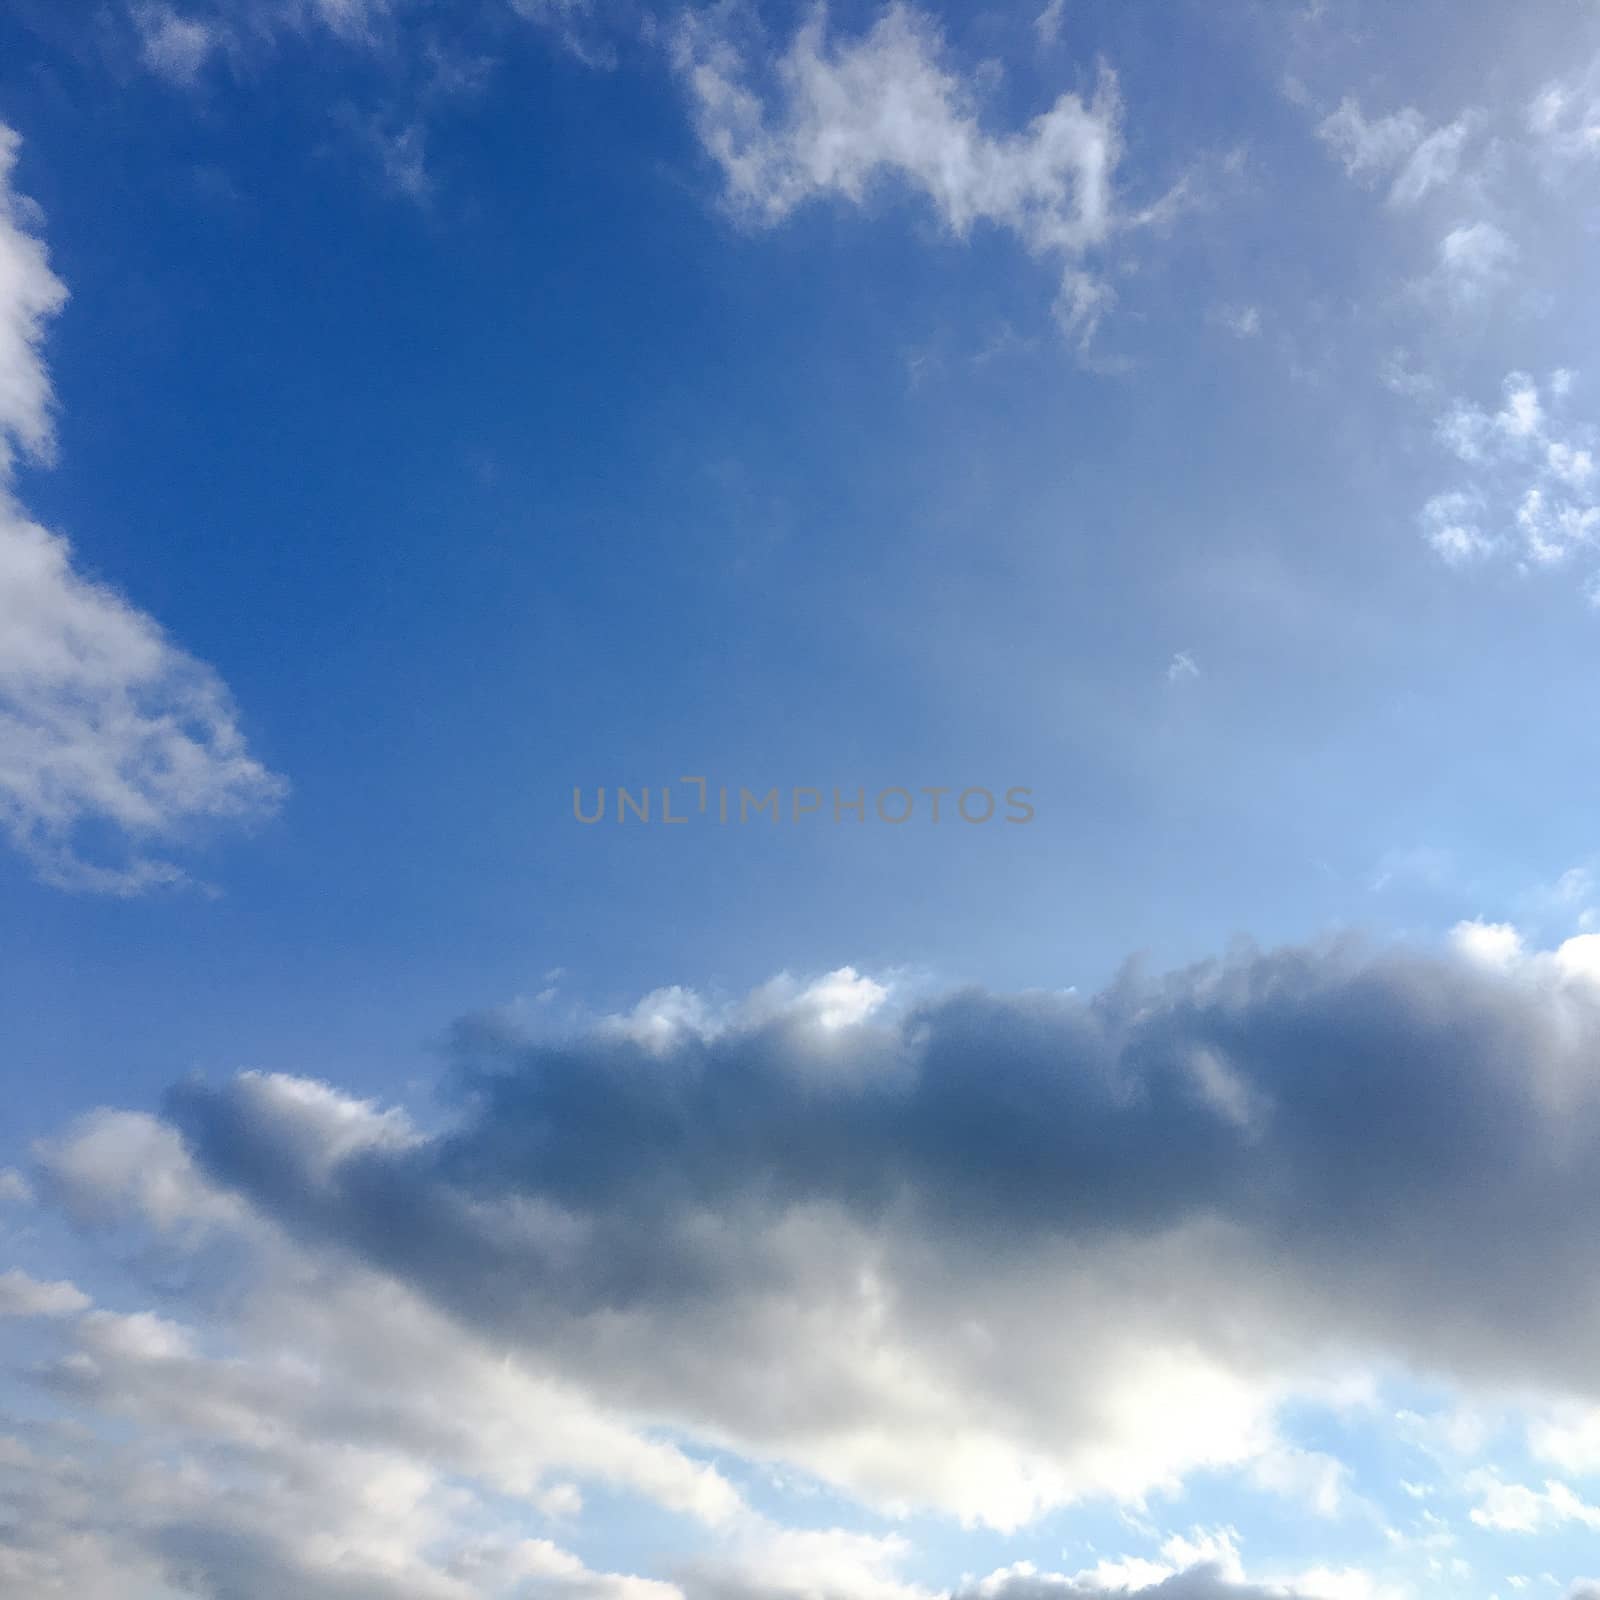 beautiful blue sky with clouds background.Sky with clouds weather nature cloud blue.Blue sky with clouds and sun. by titco